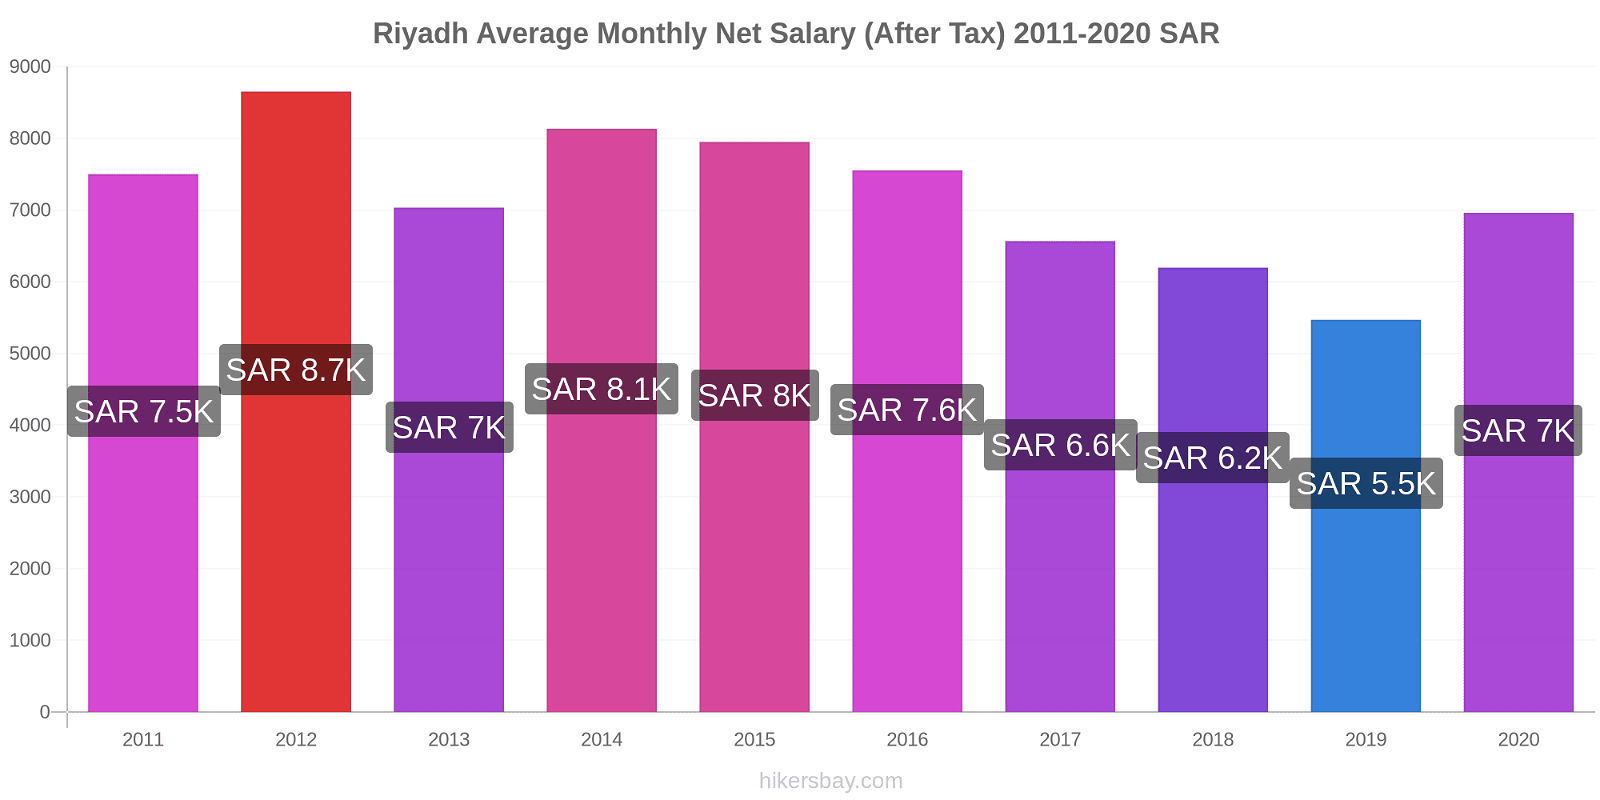 Riyadh price changes Average Monthly Net Salary (After Tax) hikersbay.com